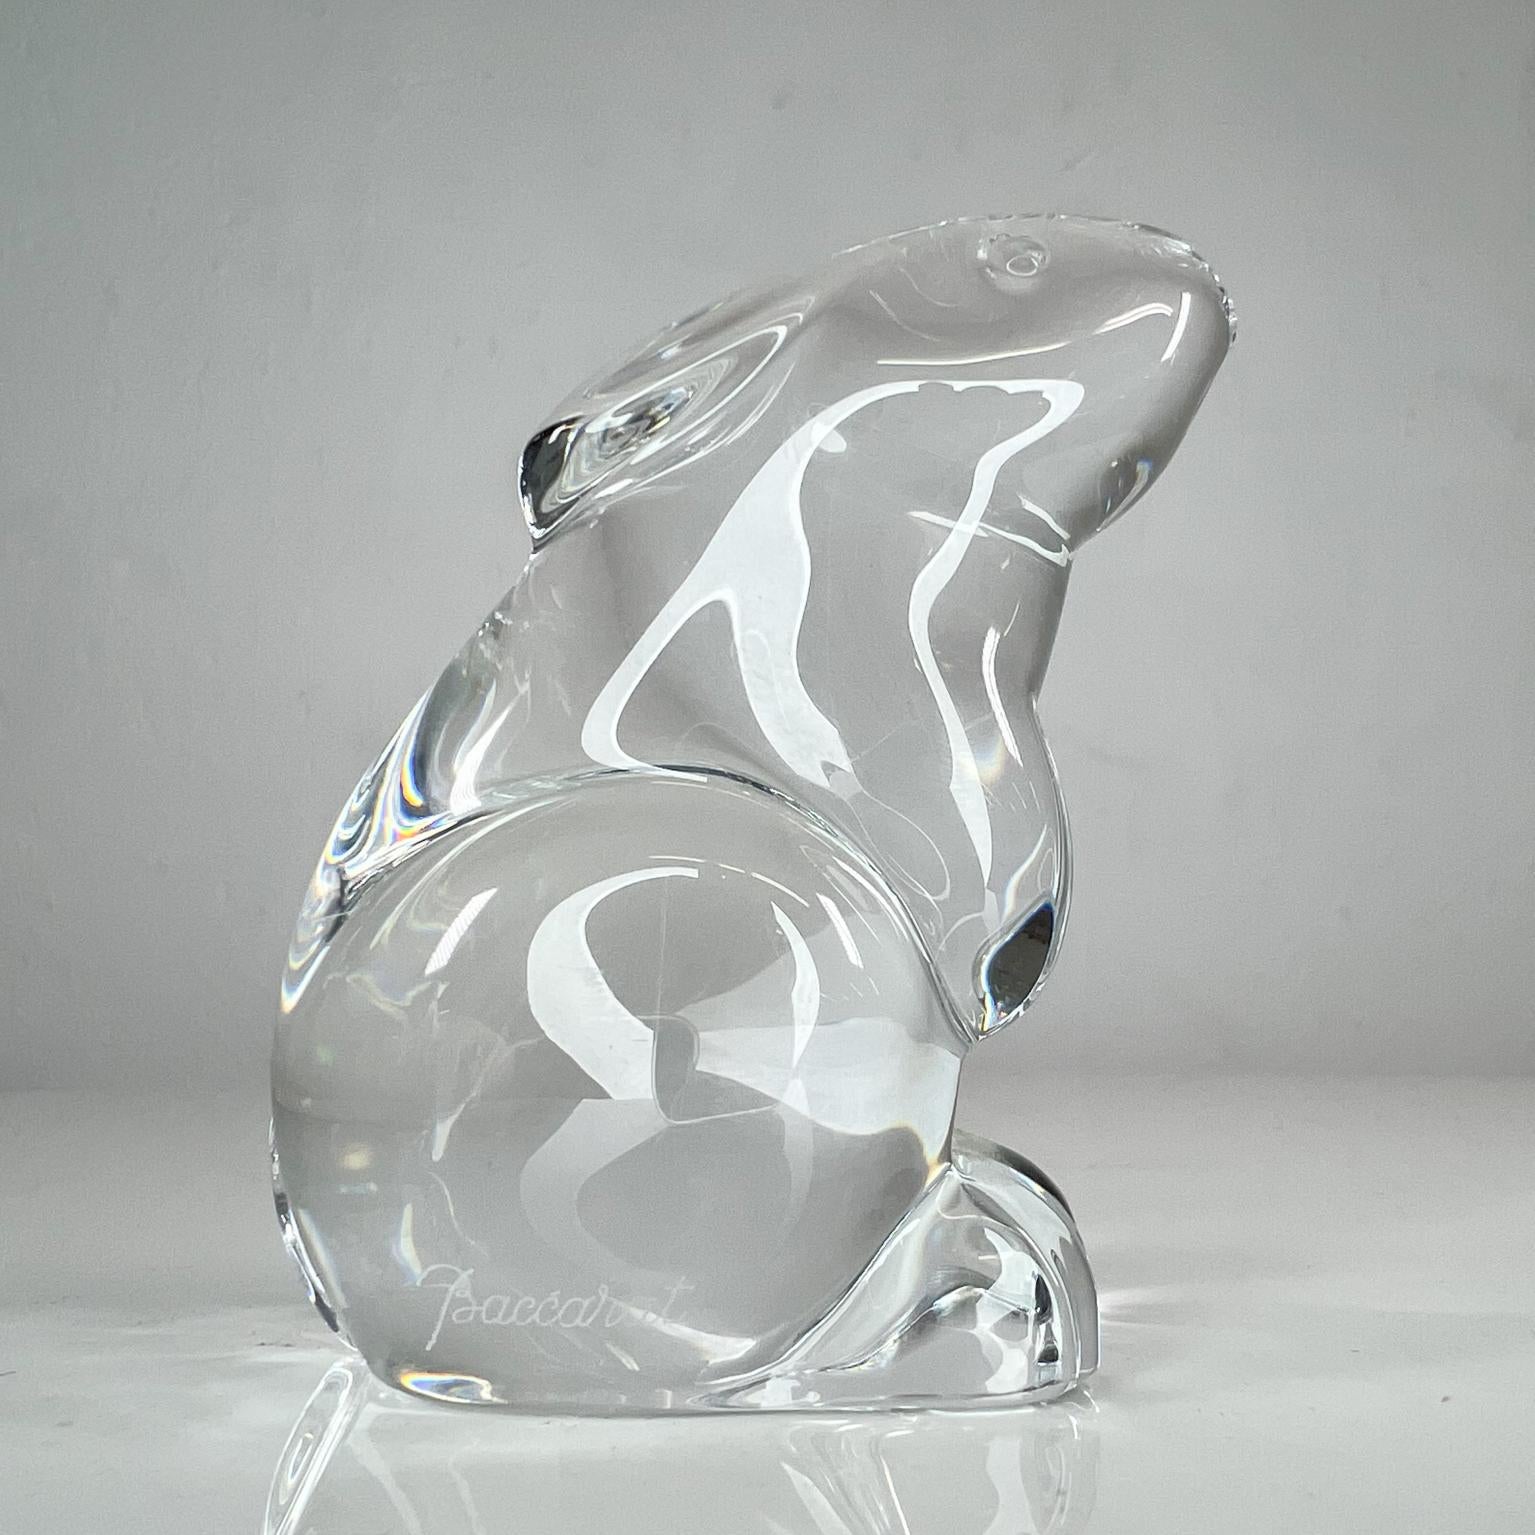 1980s French Bunny Rabbit Paperweight Baccarat Crystal Sculpture  8